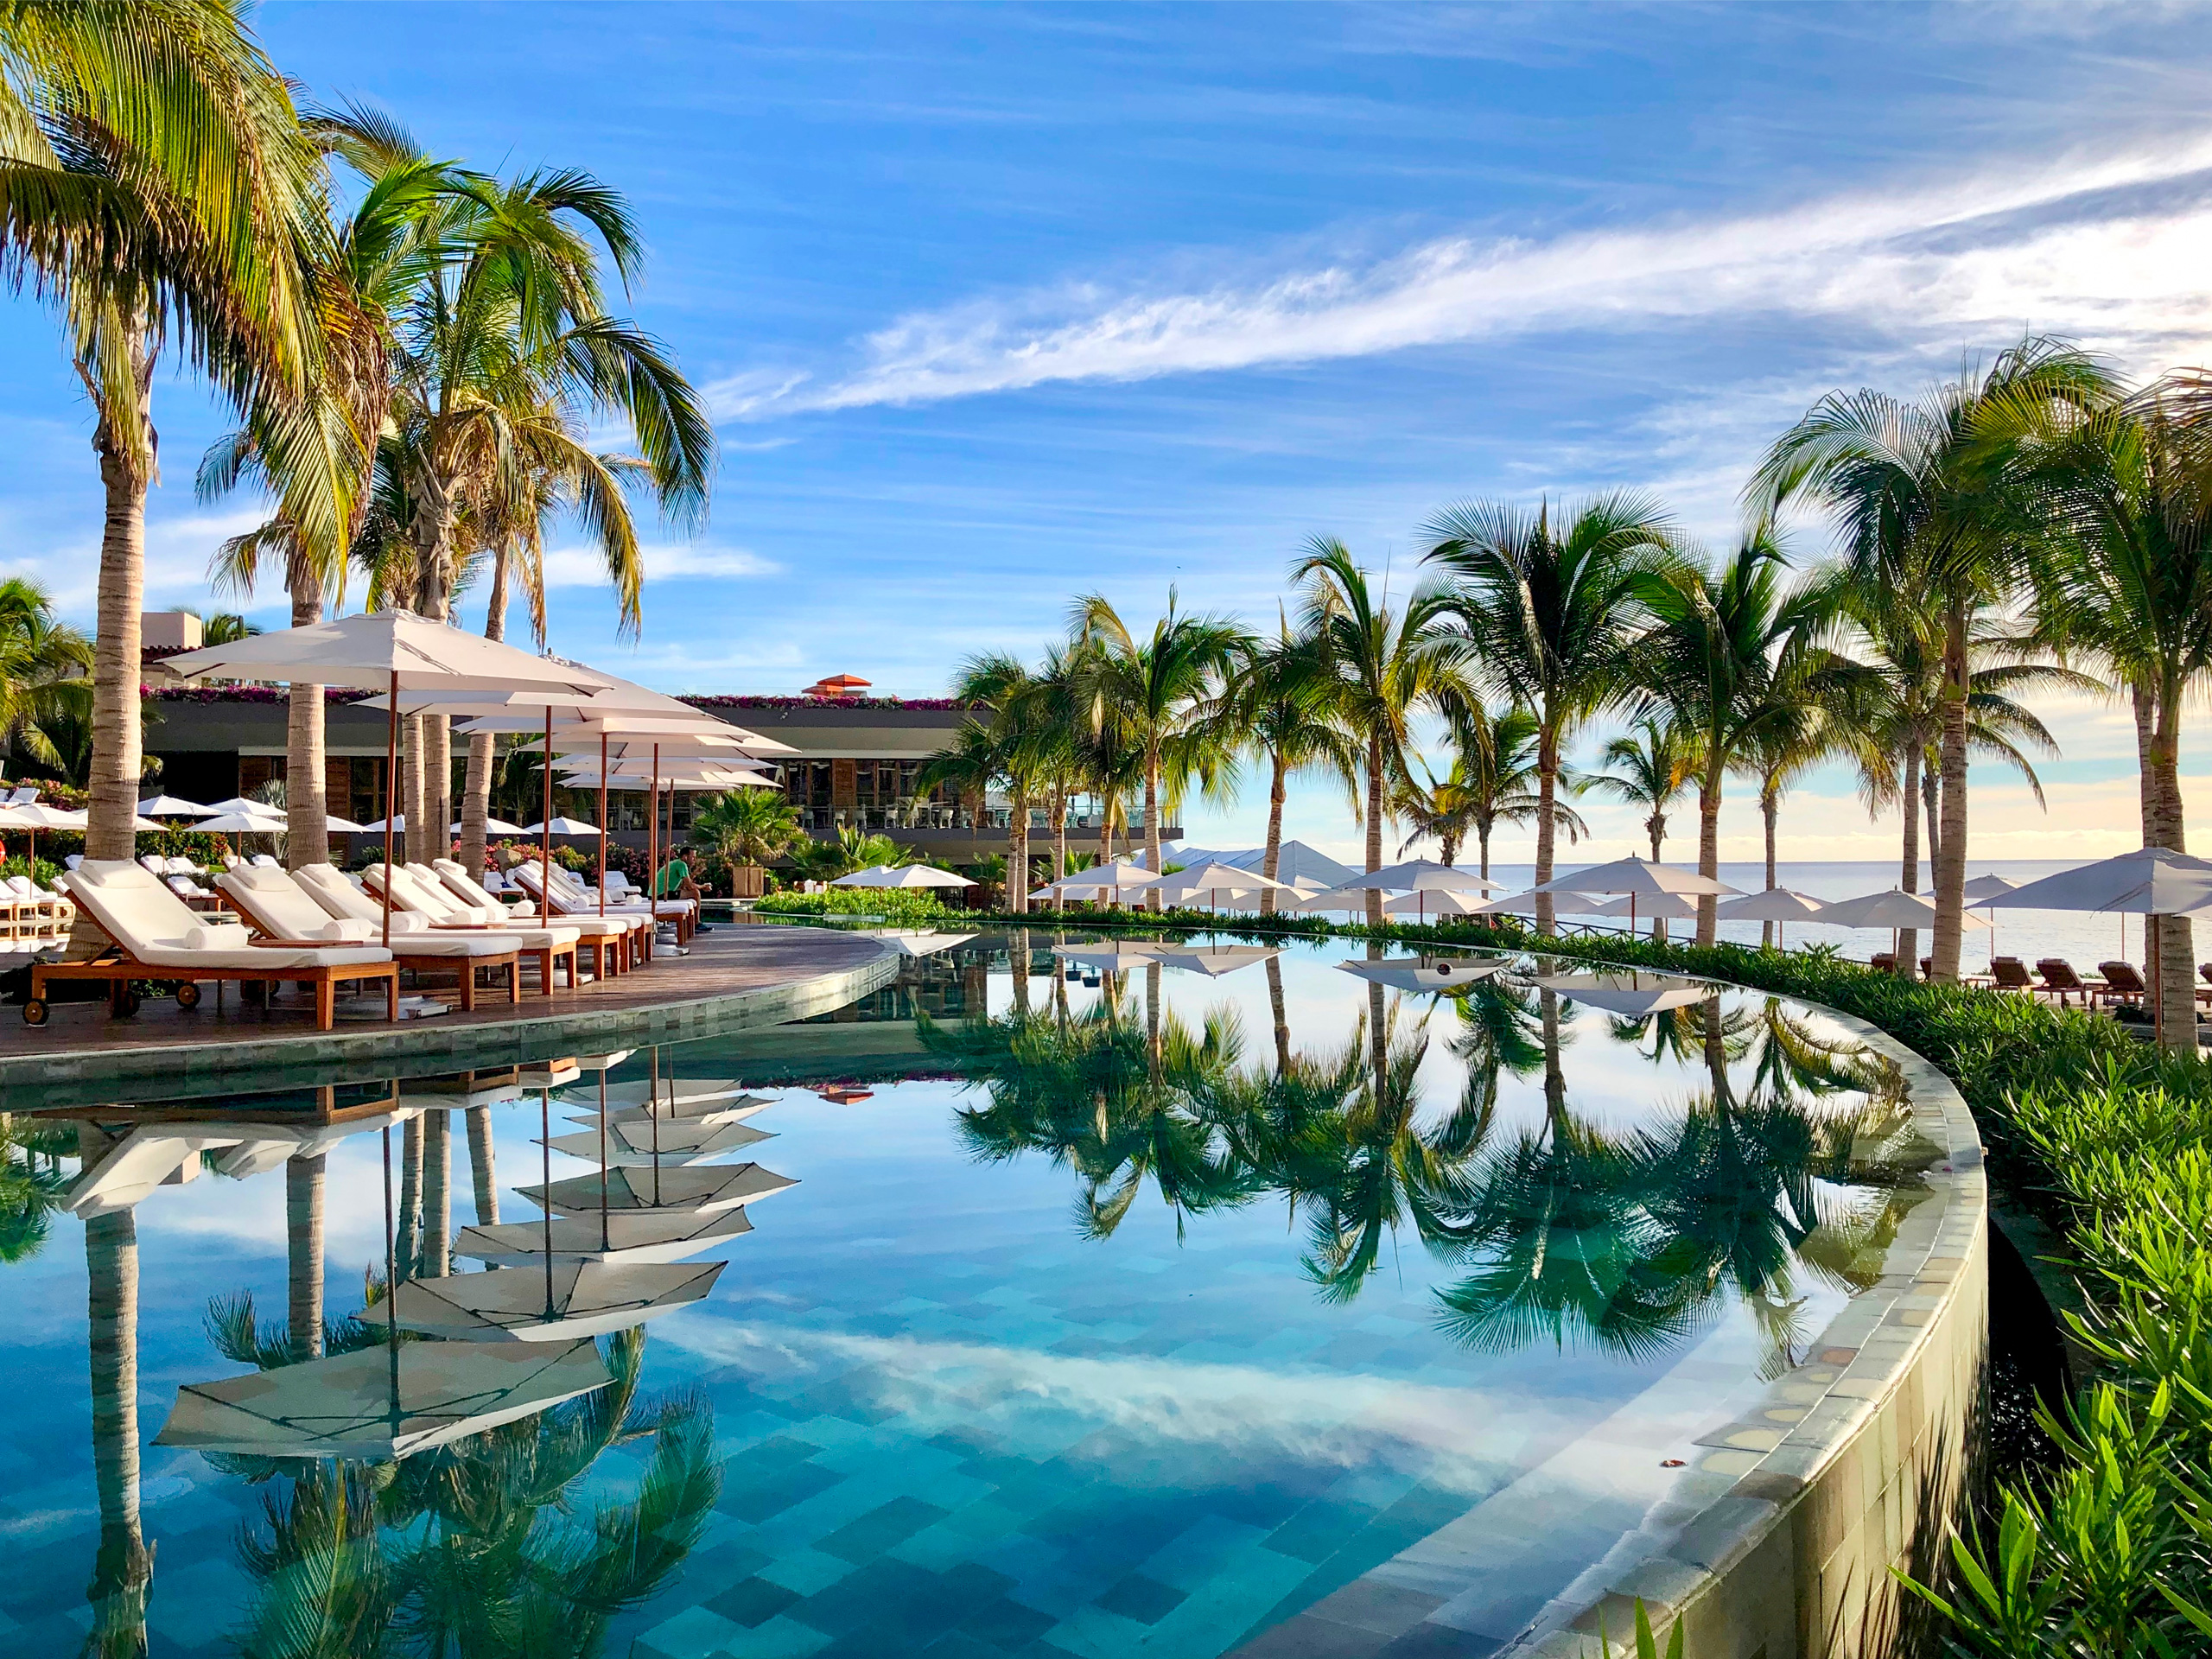 12 Best 12 Diamond All Inclusive Resorts in the Caribbean and Mexico